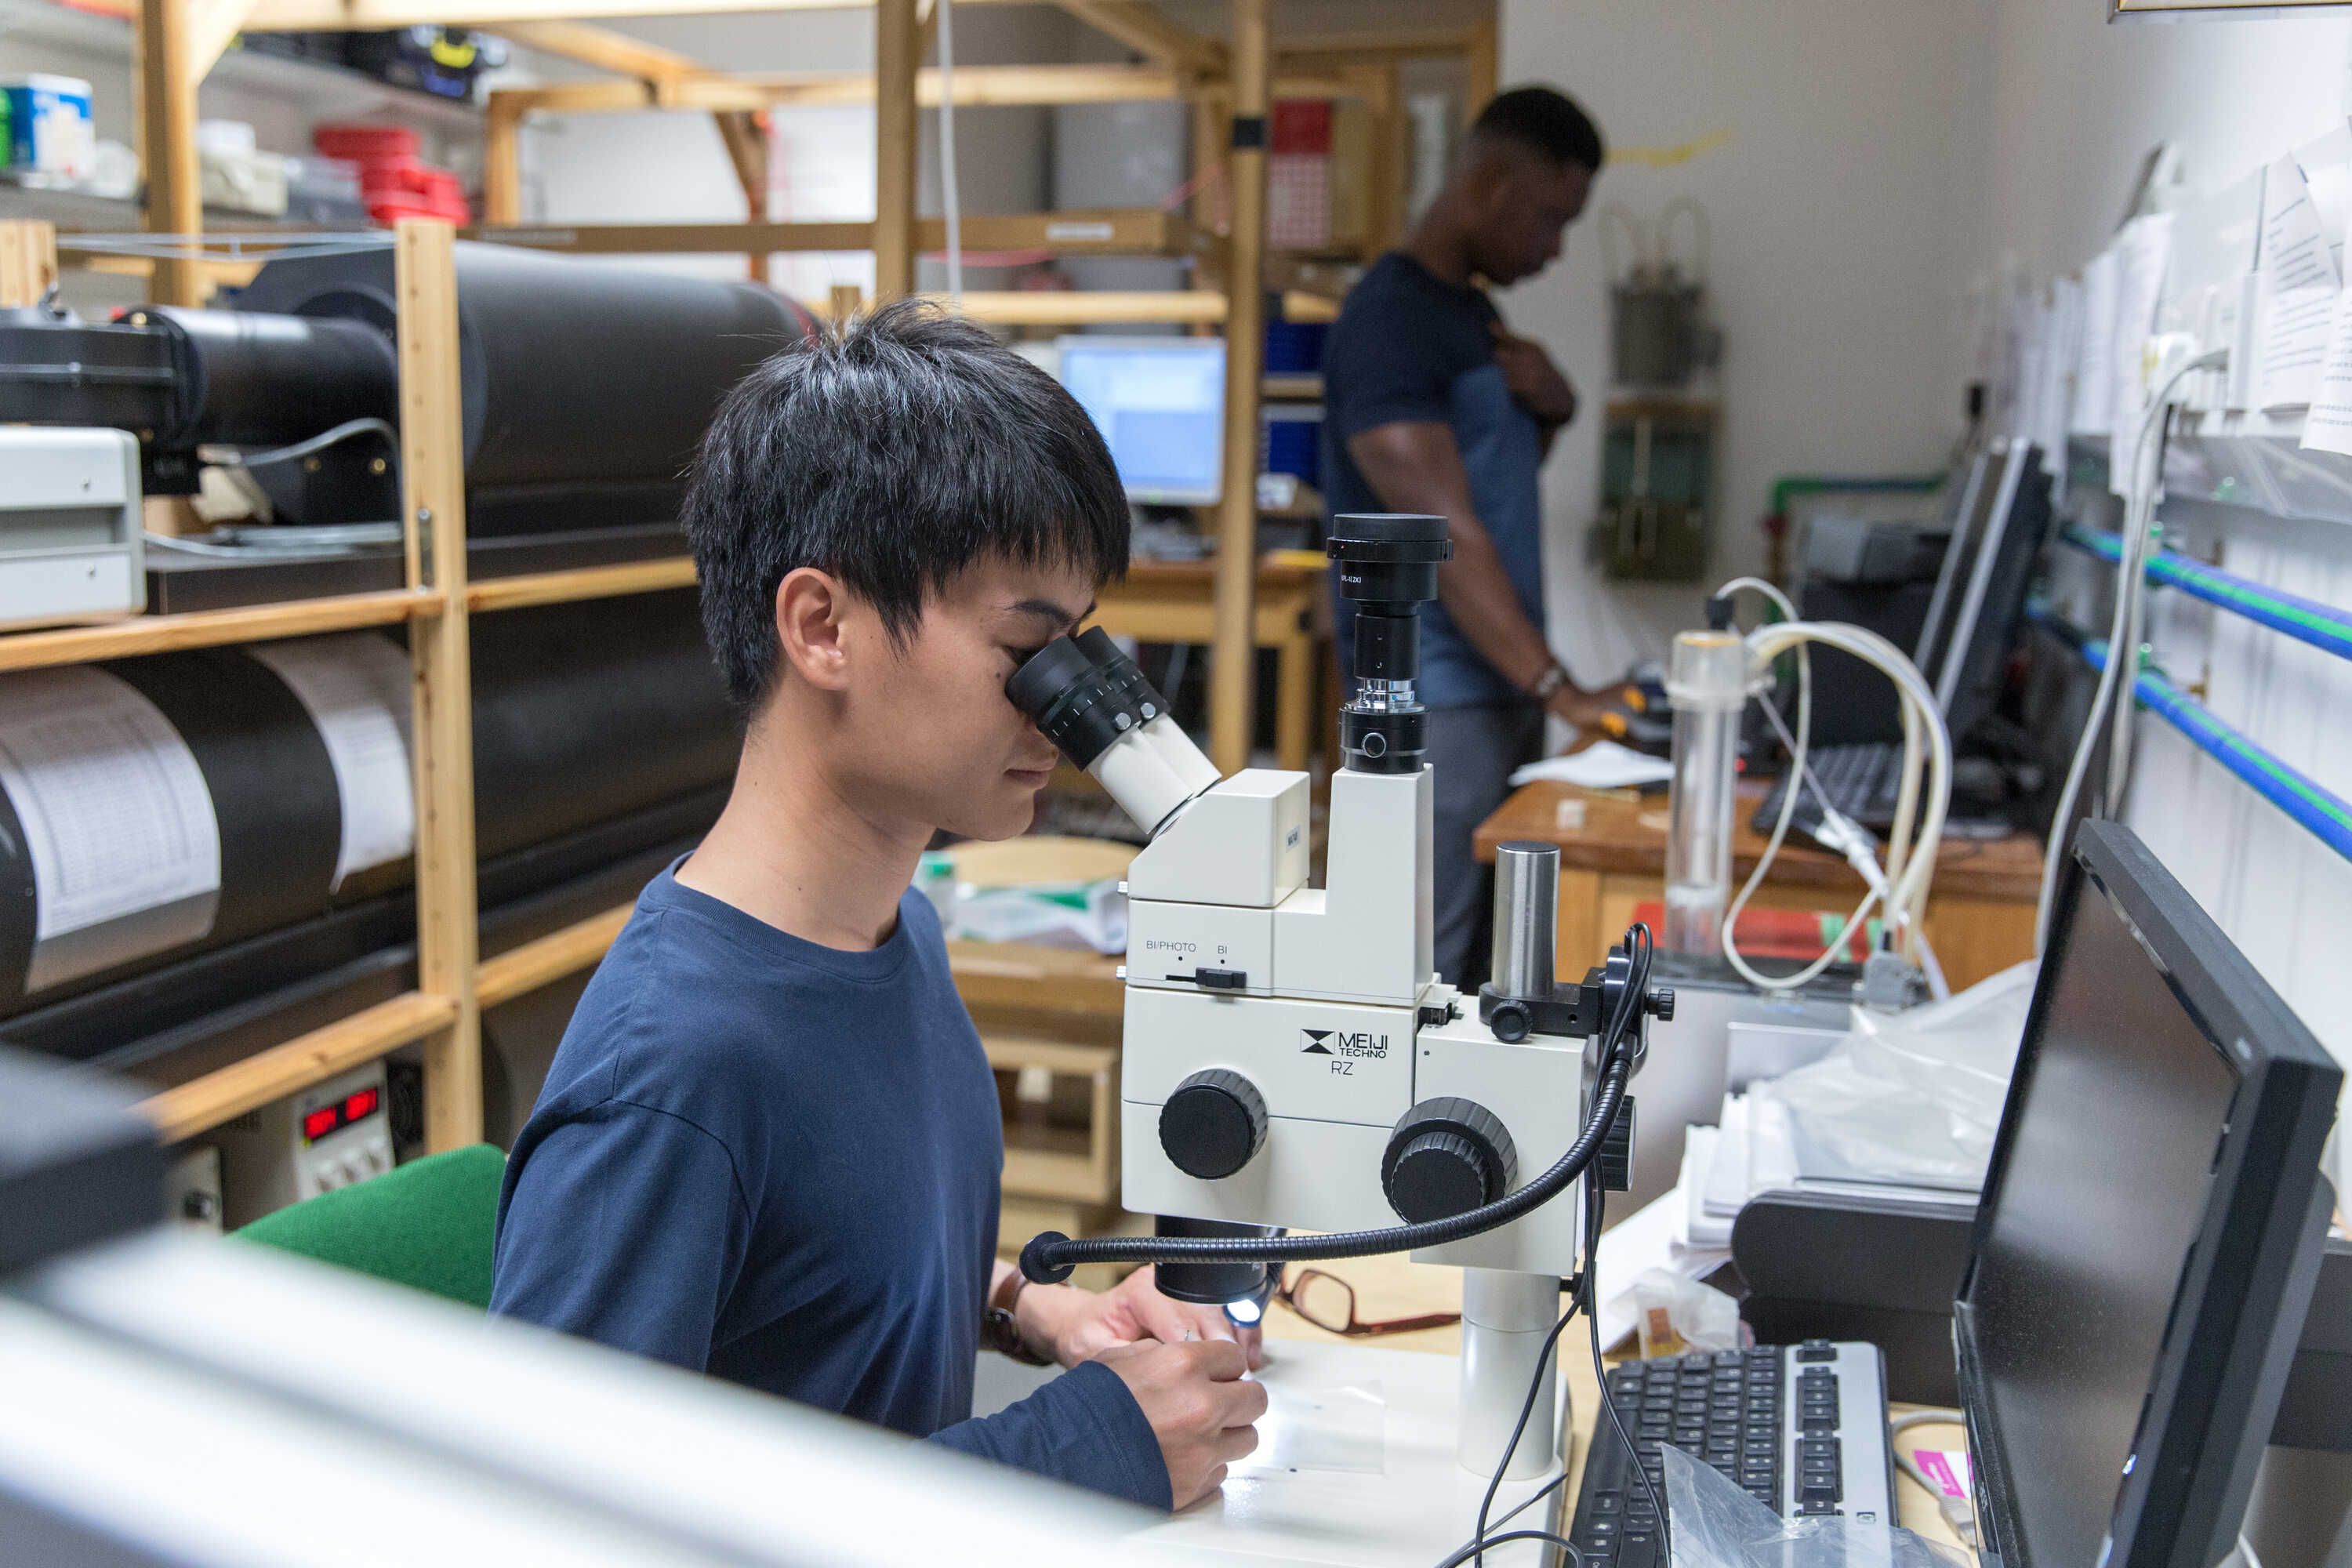 PhD students Sope Badejo and Radchagrit Supakulopas at work in the Palaeomagnetics laboratory working on palaeointensity experiments to determine Earth’s past magnetic field and picking minerals under the microscope